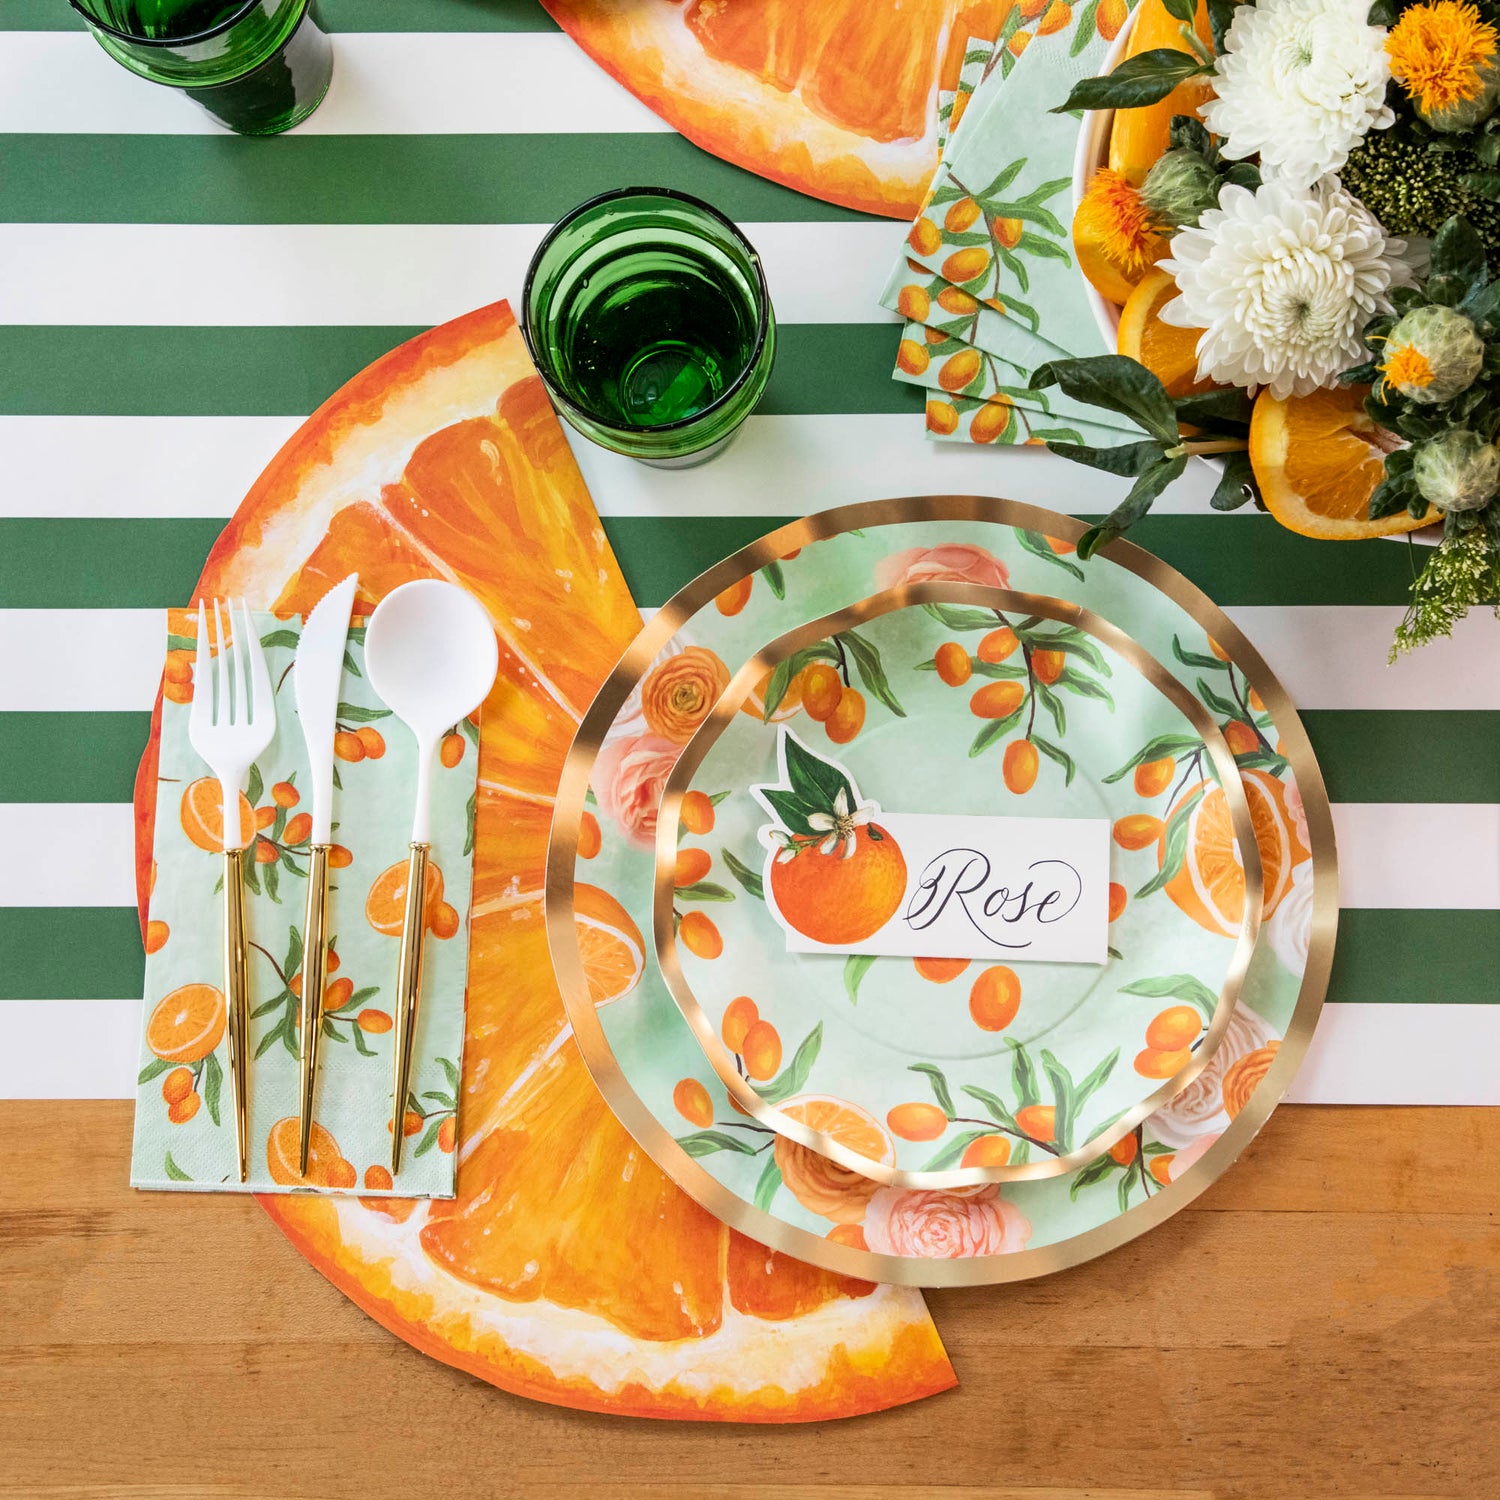 A table setting with disposable Sophistiplate White/Gold Cutlery Set and orange slices on a green and white striped tablecloth.